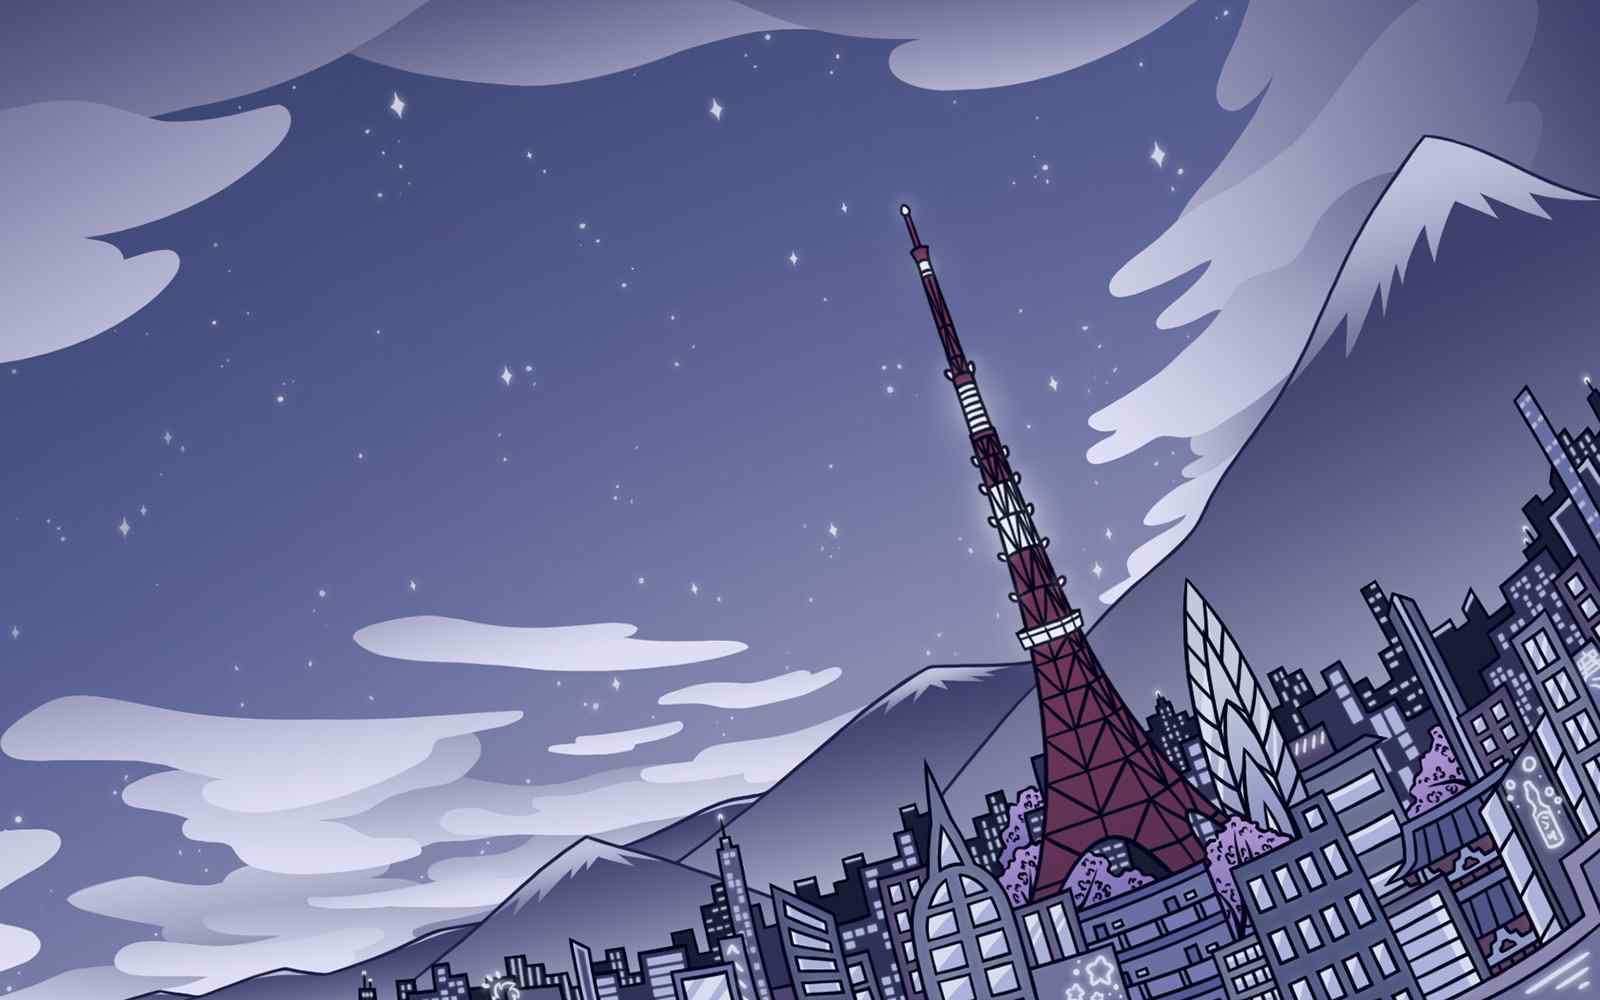 A still image shows an illustrated view across a fantasy city landscape at night 